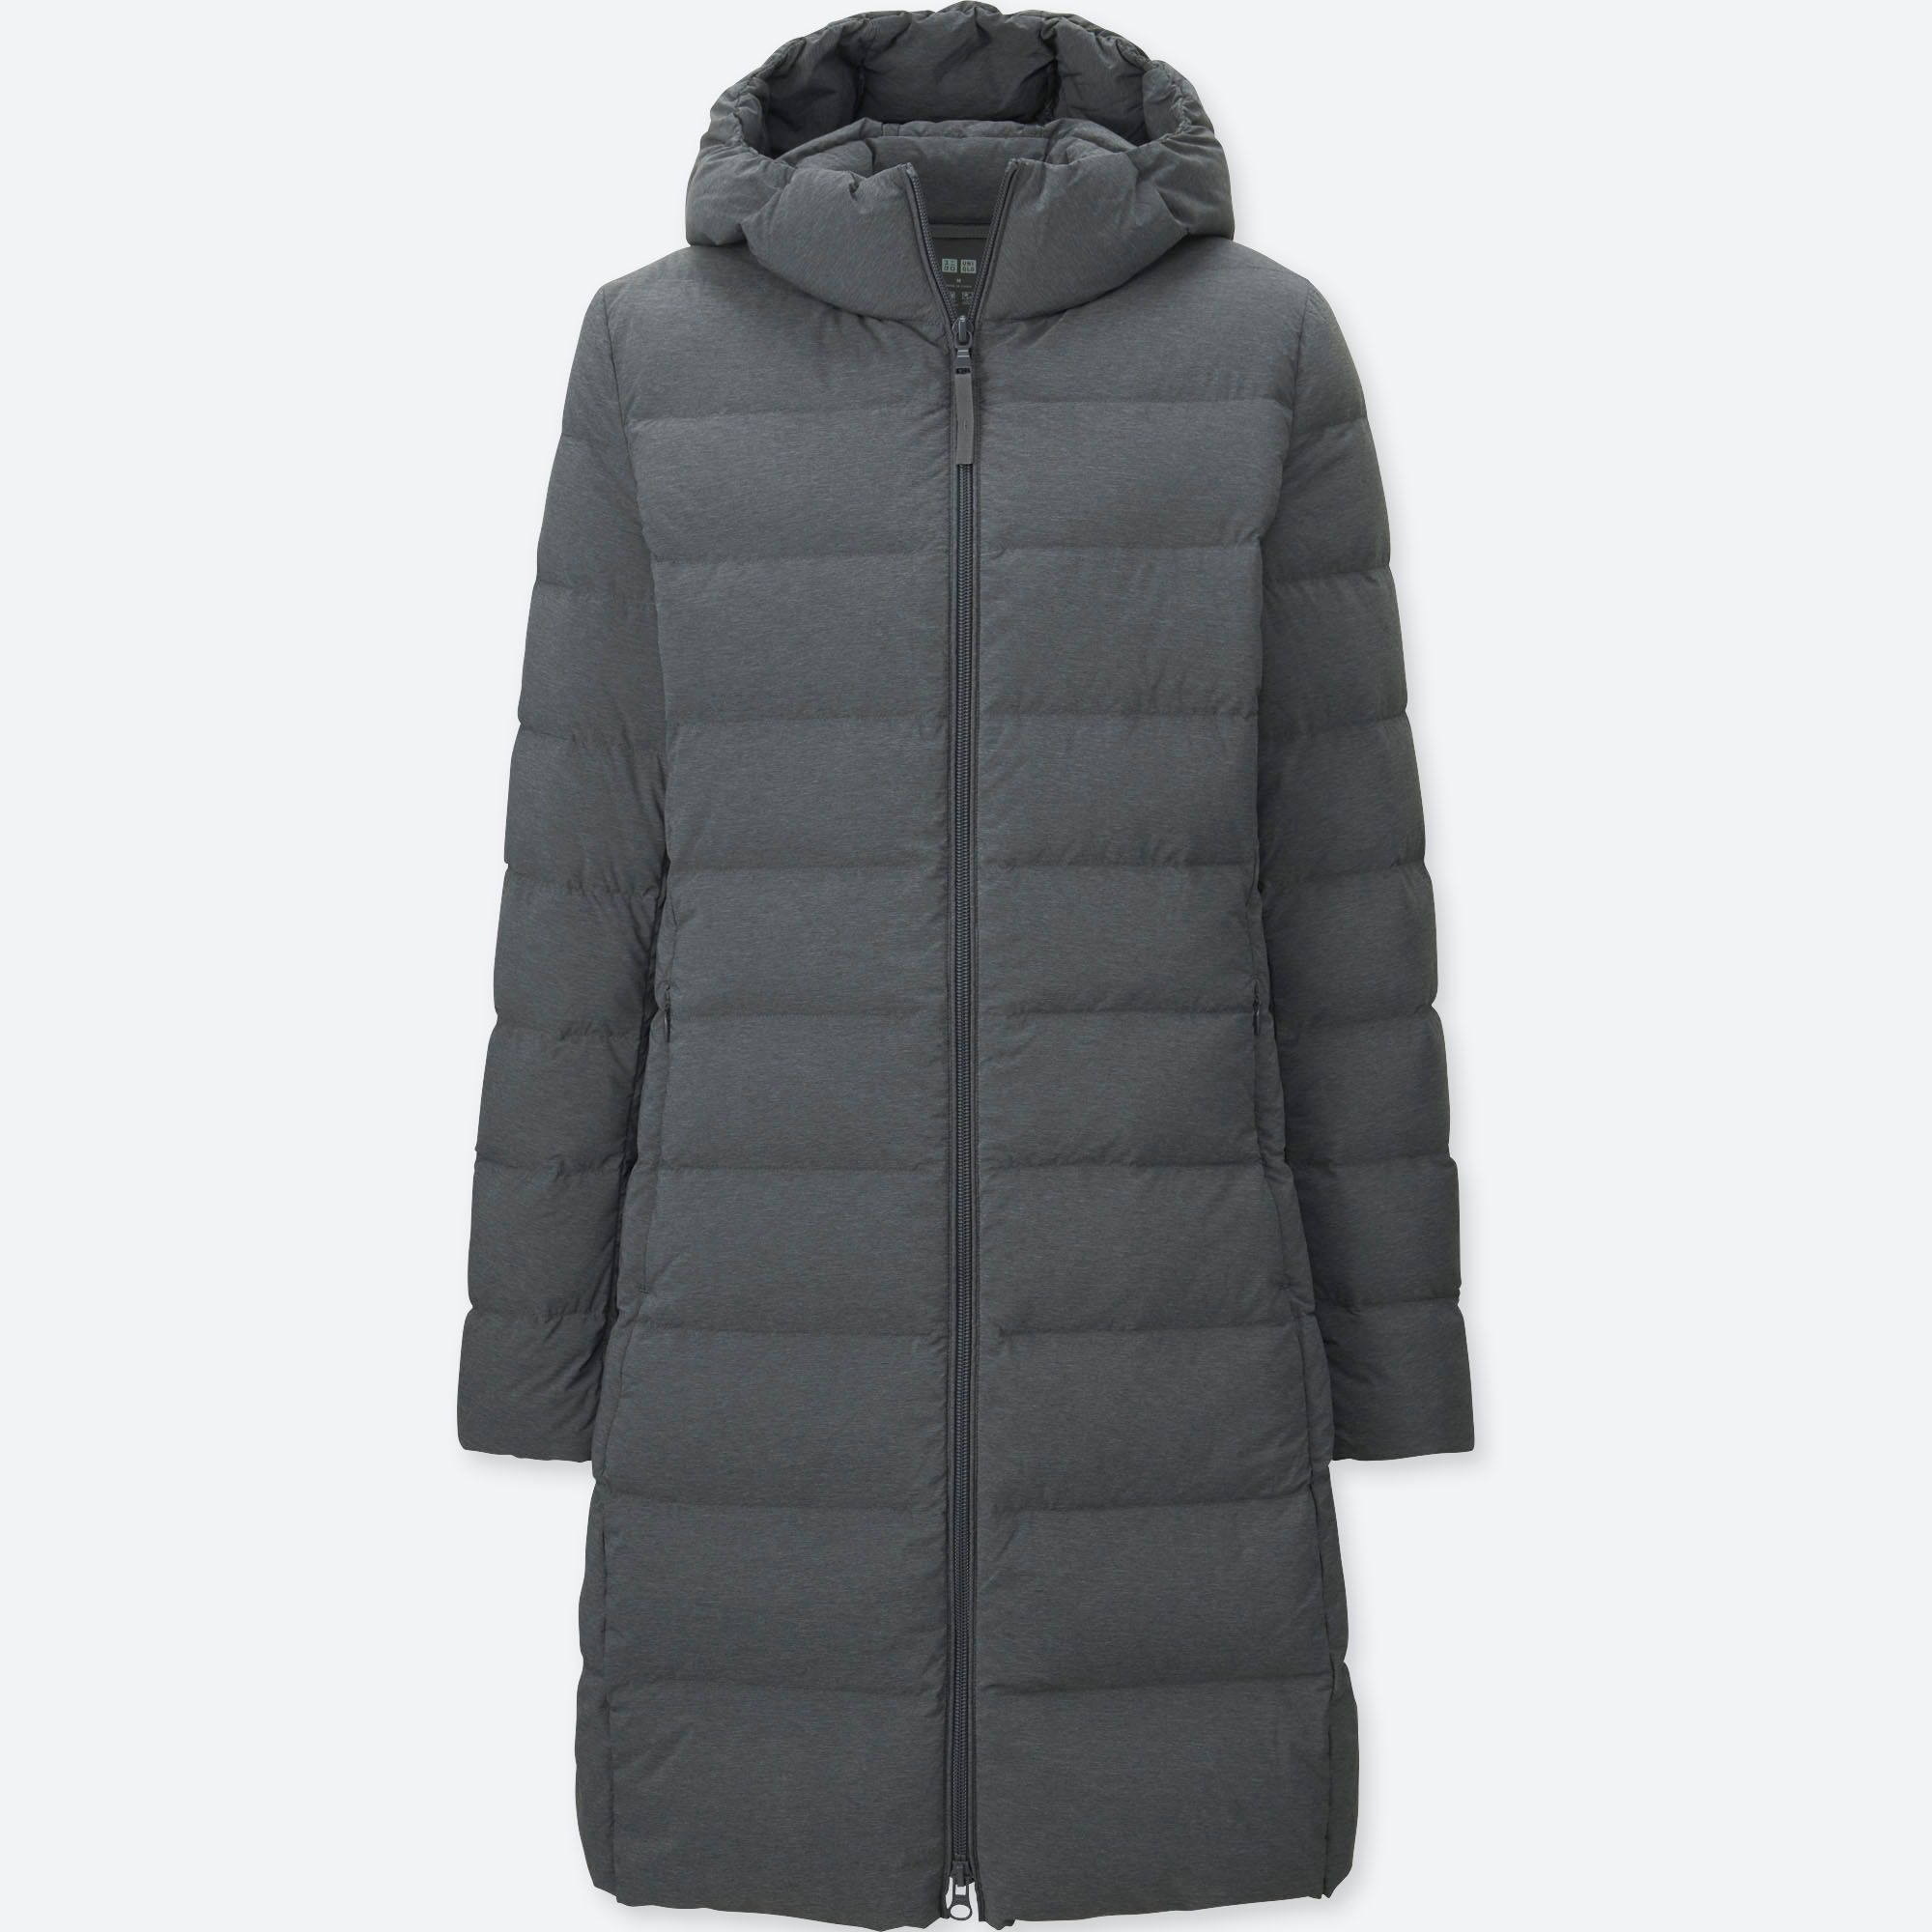 uniqlo ultra light down jacket review | Decoratingspecial.com